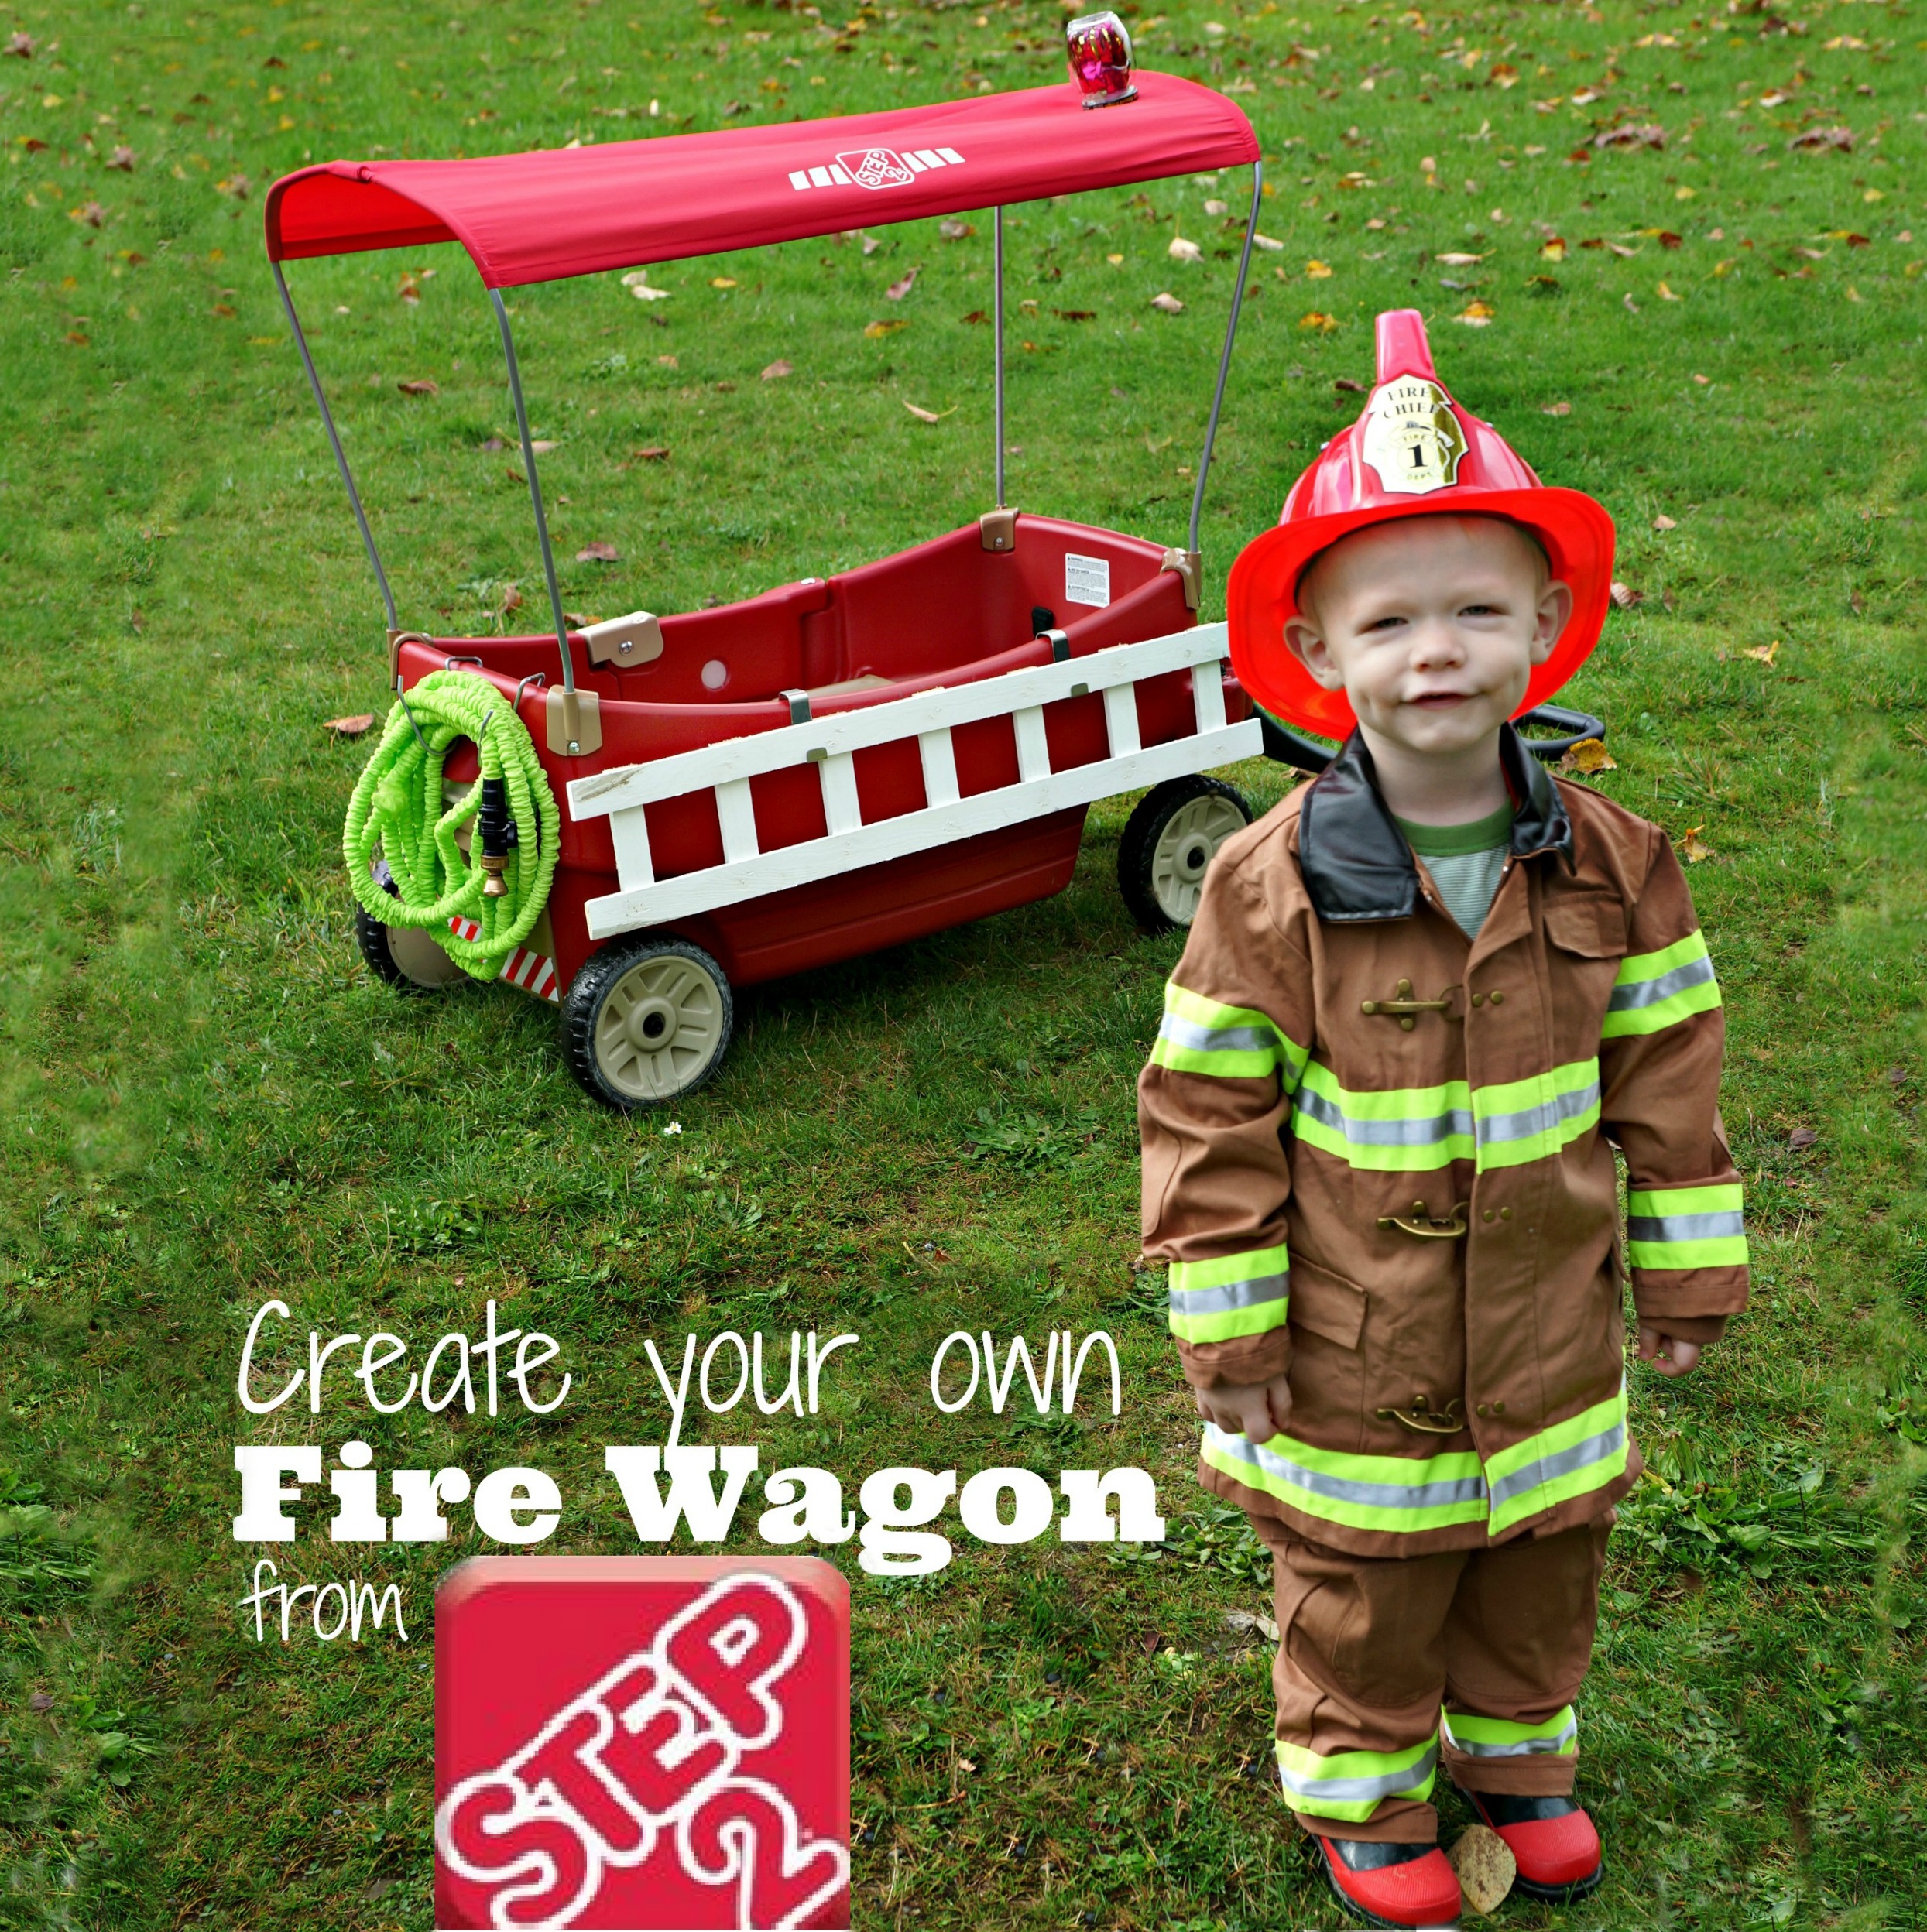 How To Make A Wagon Into A Fire Truck - GeloManias